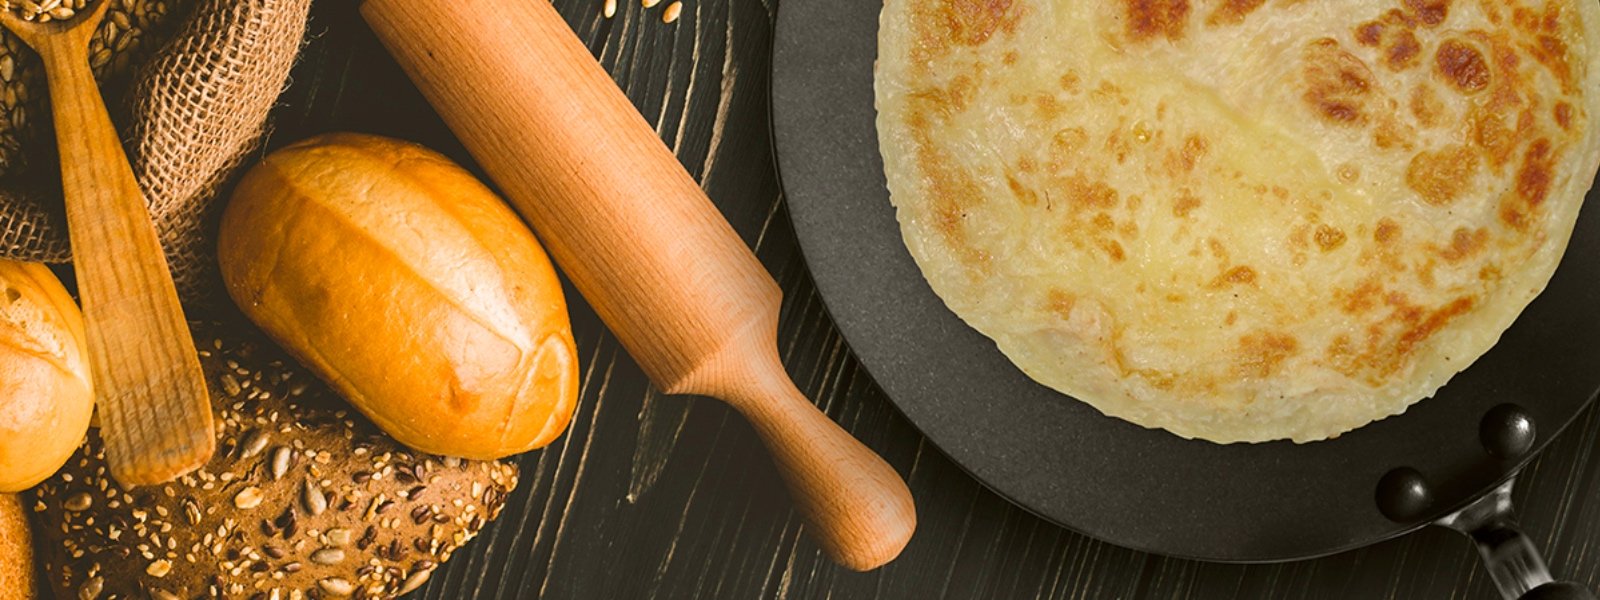 A Guide to Choosing the Perfect Roti Tawa : Brodees